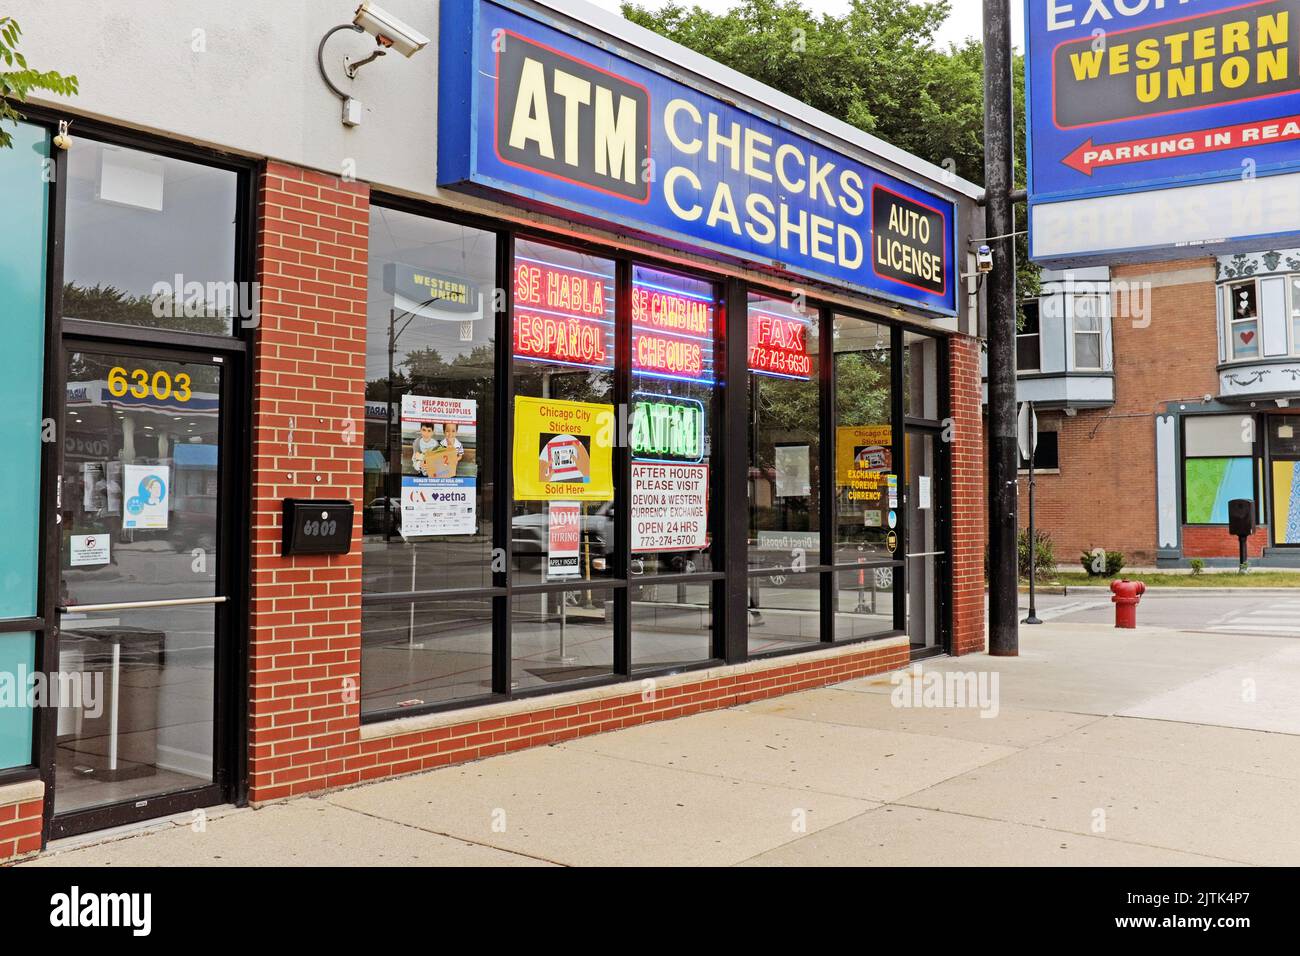 A check cashing store in Chicago, Illinois with the Western Union sign hanging on the outside on July 16, 2022. Stock Photo